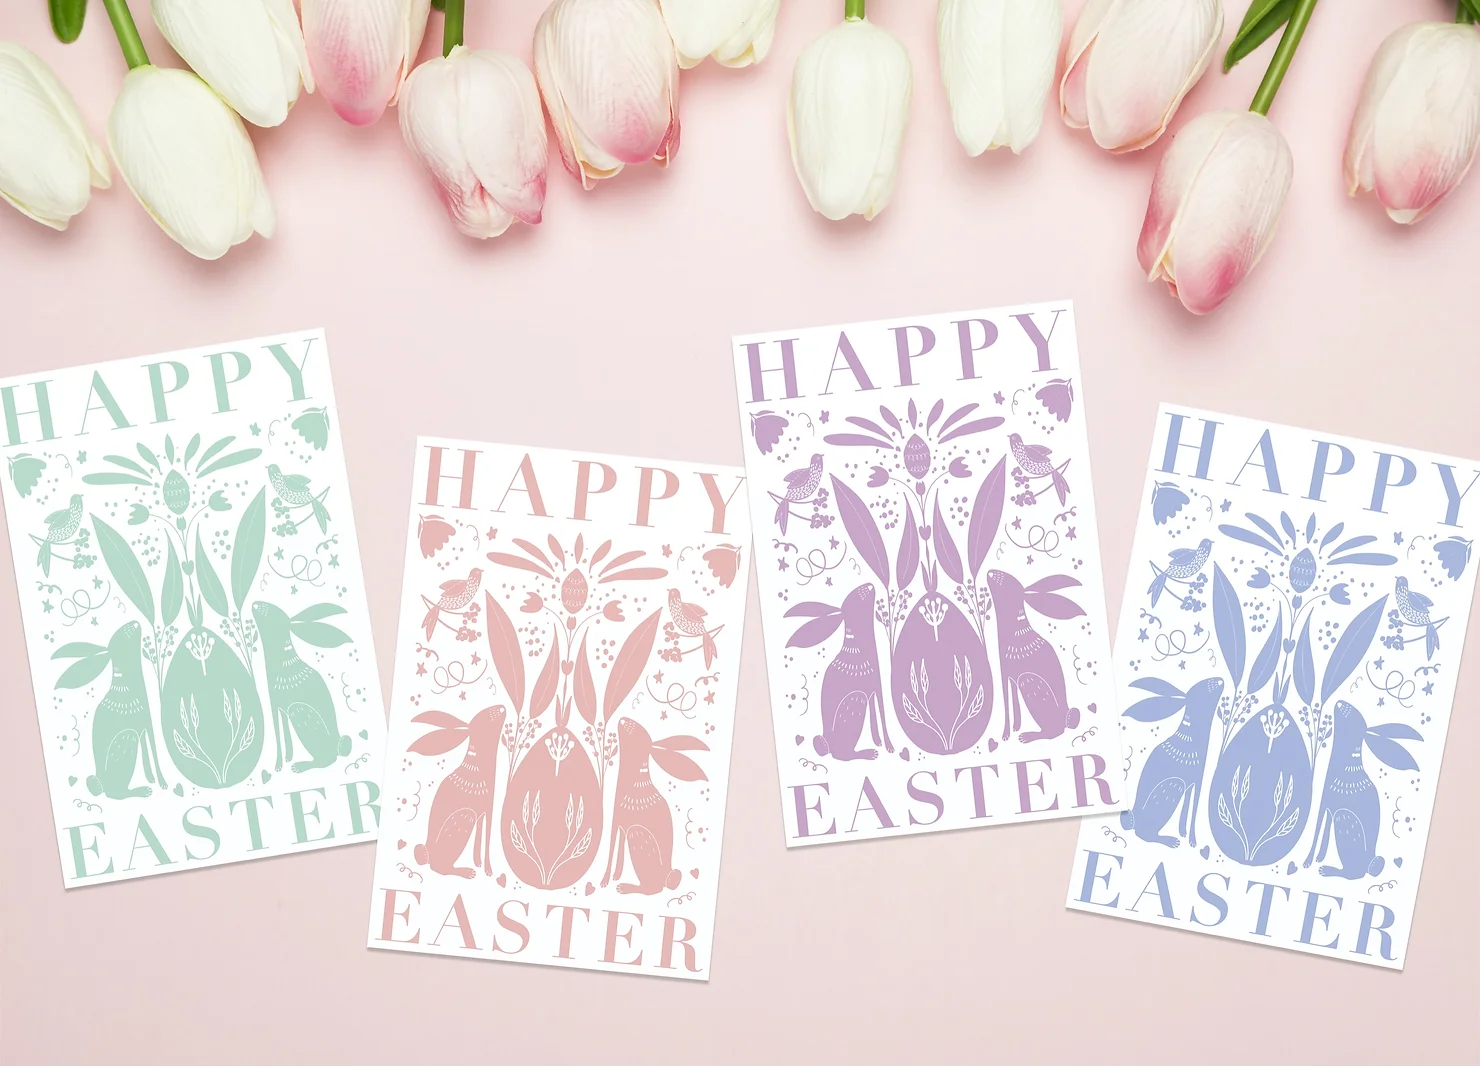 Printable easter cards in mint, pink, purple and blue.